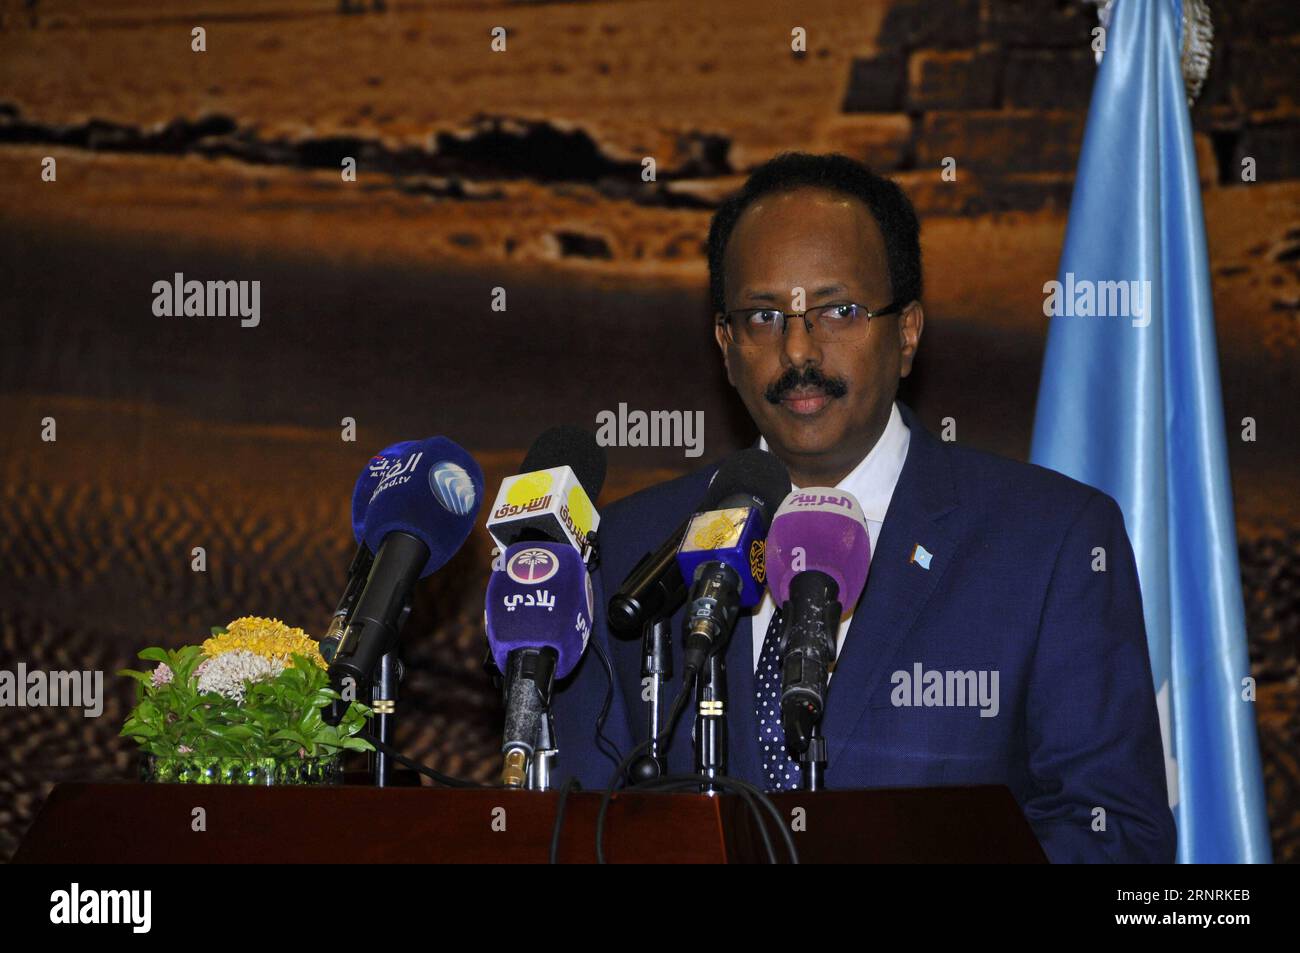 (171005) -- KHARTOUM, Oct. 5, 2017 -- Somali President Mohamed Abdullahi Mohamed speaks during a joint press conference with his Sudanese counterpart Omar al-Bashir (not seen in picture) in Khartoum, capital of Sudan, on Oct. 5, 2017. Sudanese President Omar al-Bashir said on Thursday that his country would exert utmost efforts for peace and stability in Somalia. The President made the remarks at a joint press conference after a meeting with Mohamed Abdullahi Mohamed in the capital. ) SUDAN-KHARTOUM-PRESIDENT-SOMALI PRESIDENT-EFFORTS FOR PEACE AND STABILITY IN SOMALIA Mohamed?Khidir PUBLICATIO Stock Photo